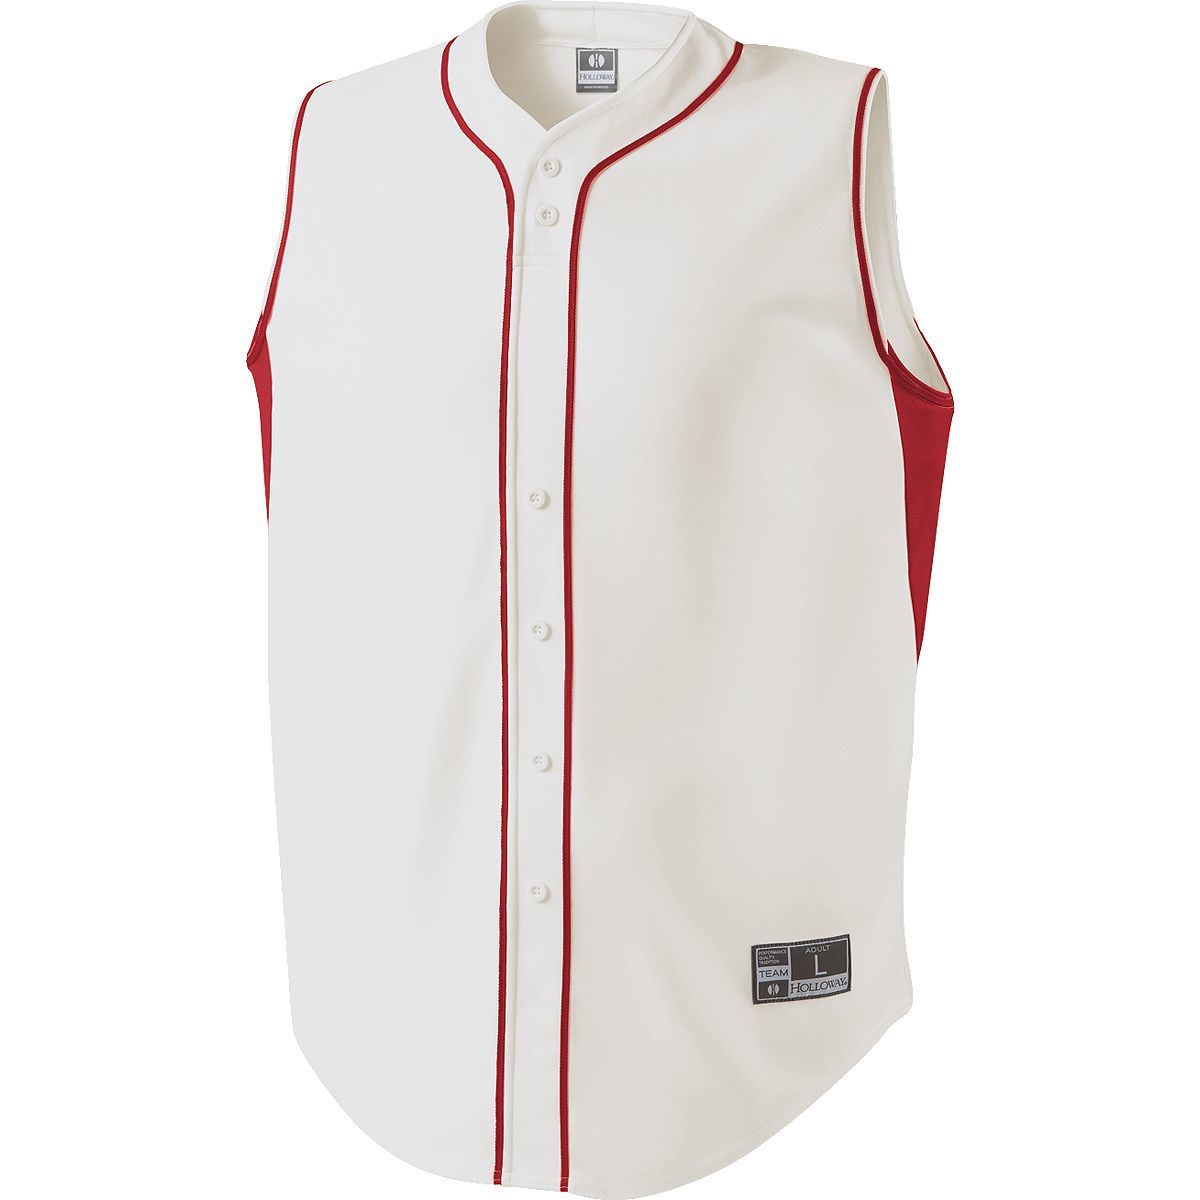 Holloway Fierce Jersey in White/Scarlet  -Part of the Adult, Adult-Jersey, Baseball, Holloway, Shirts, All-Sports, All-Sports-1 product lines at KanaleyCreations.com